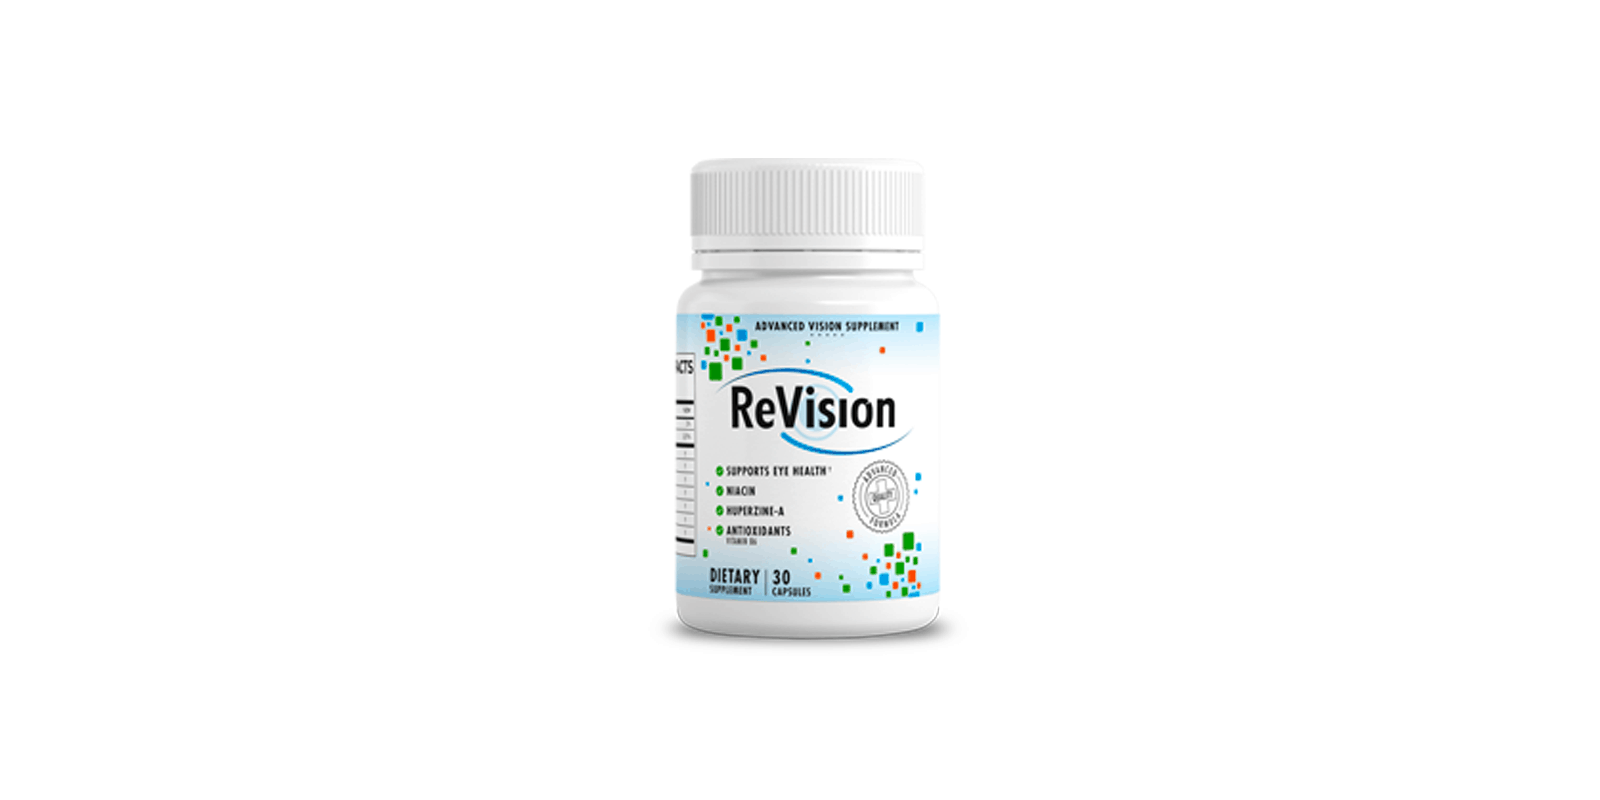 Revision-supplement-reviews